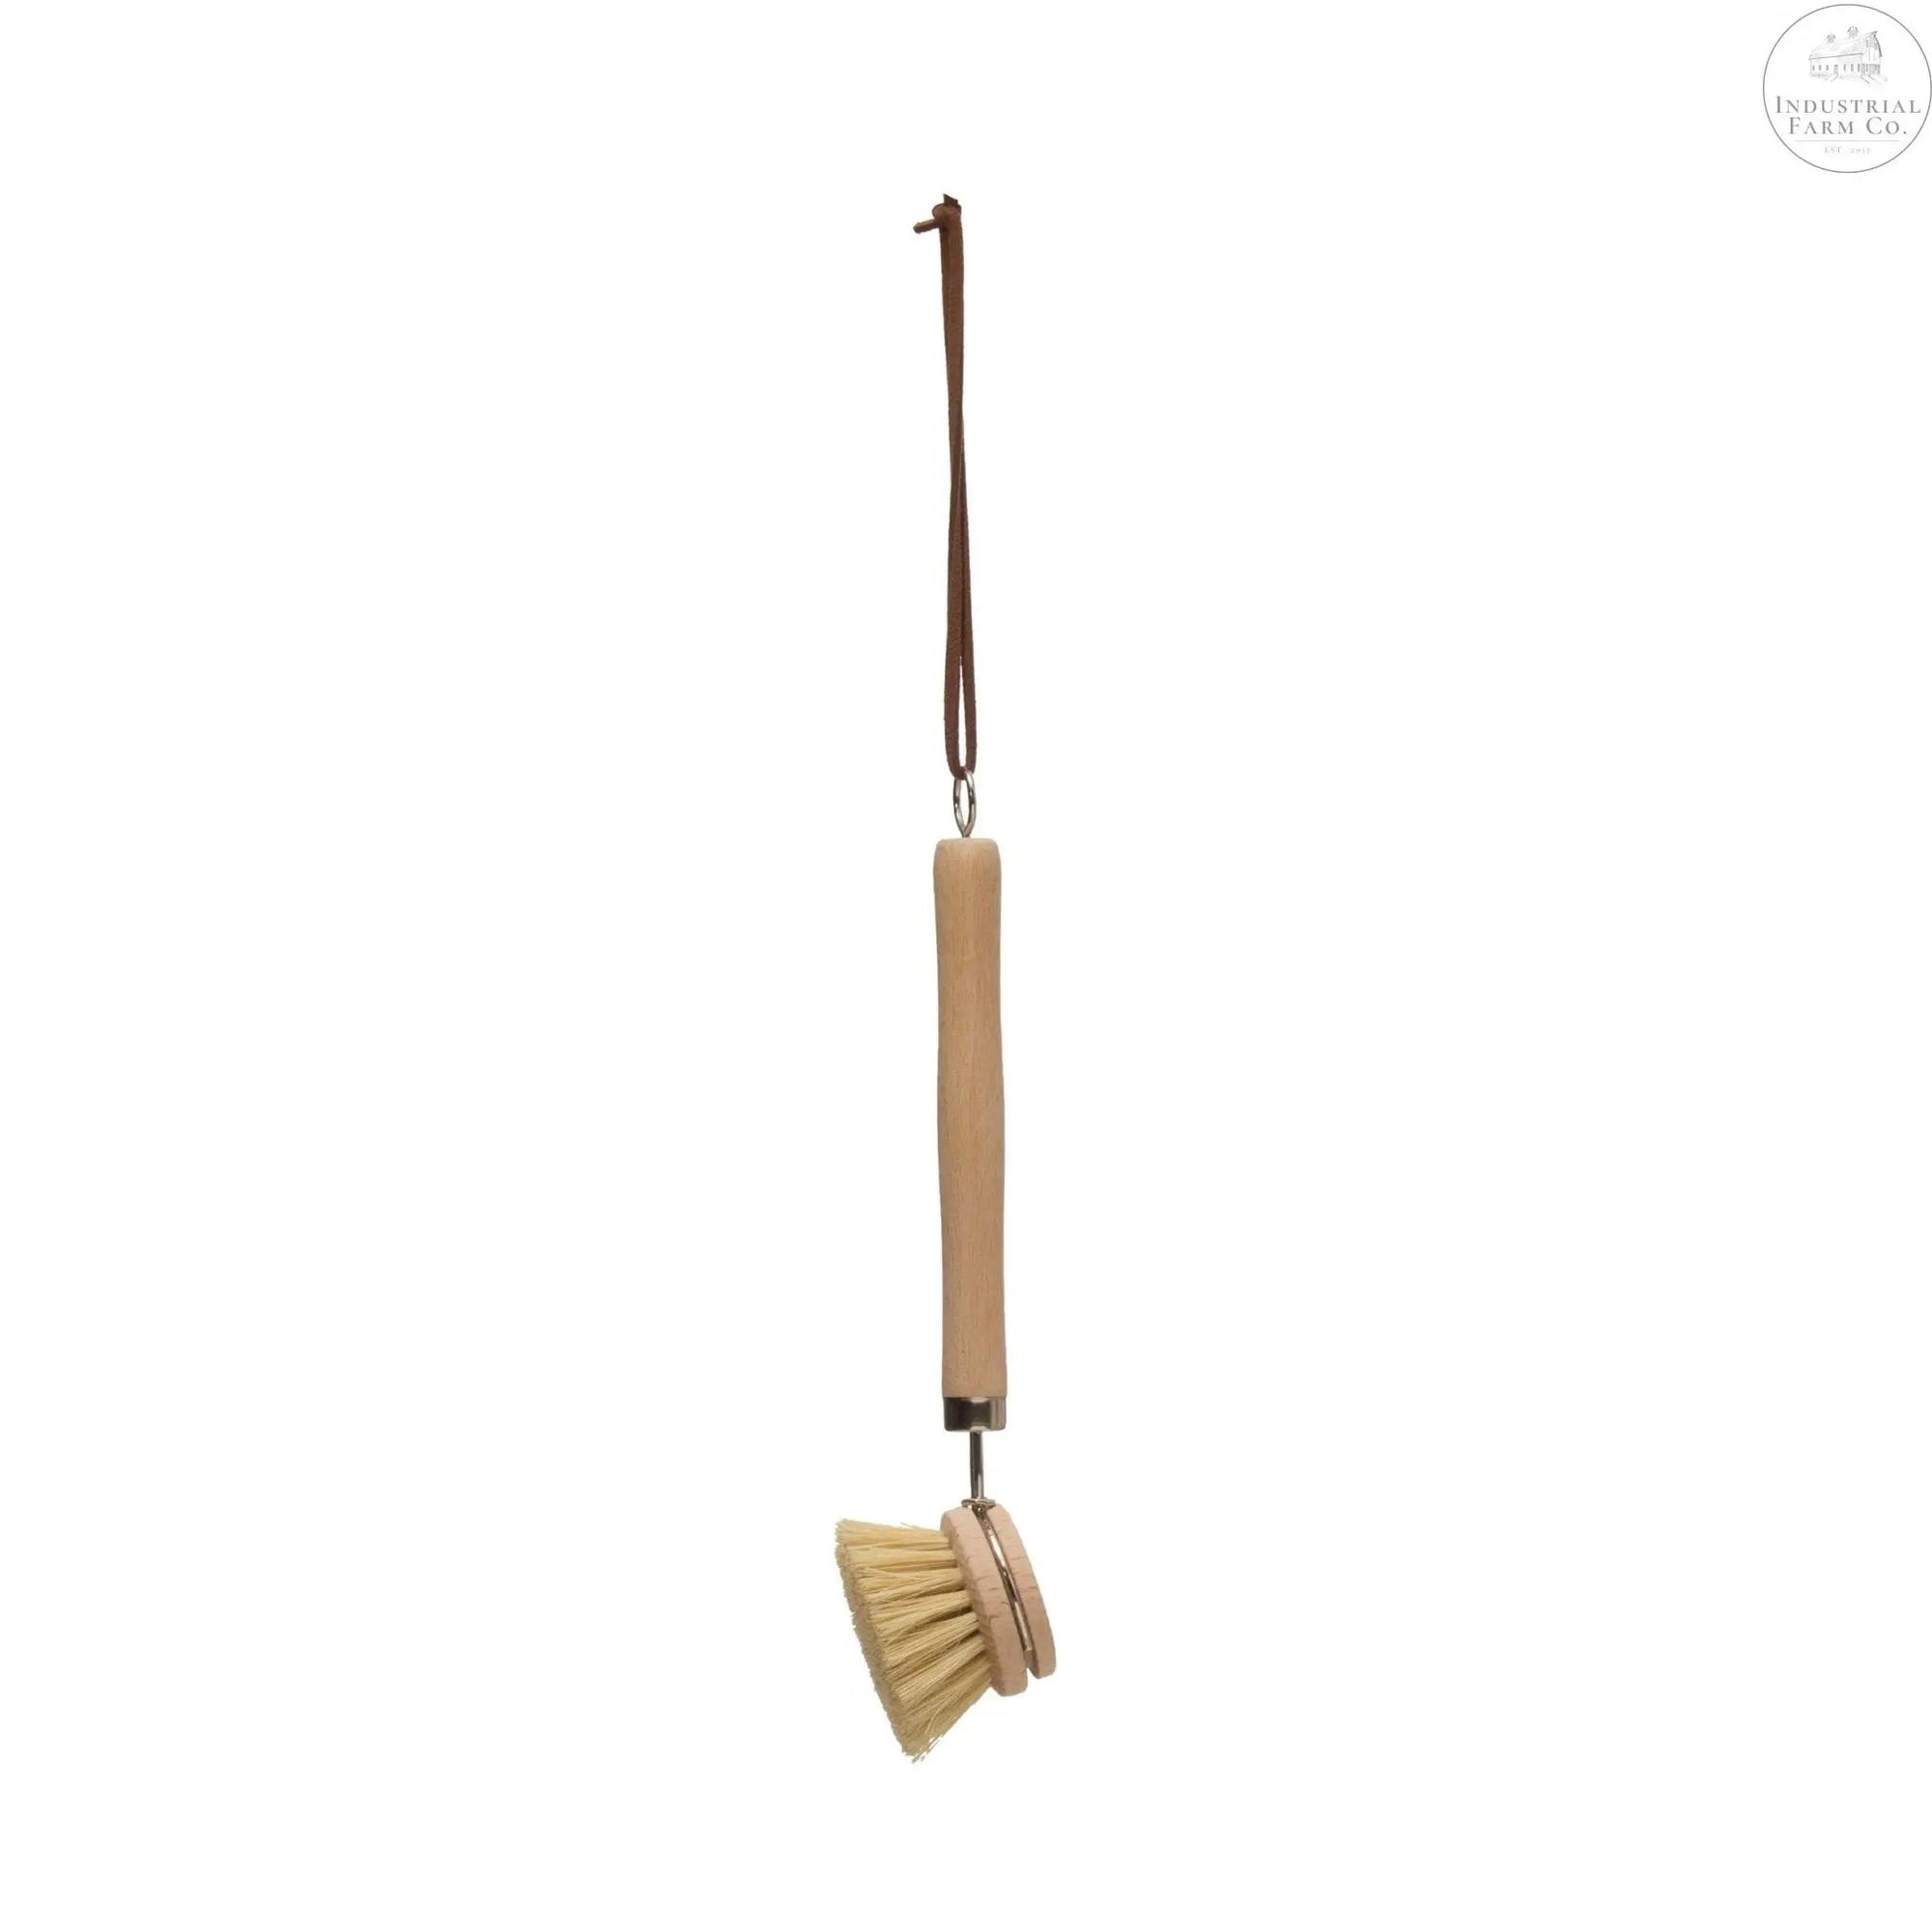 Beech Wood Cleaning Brush  Default Title   | Industrial Farm Co